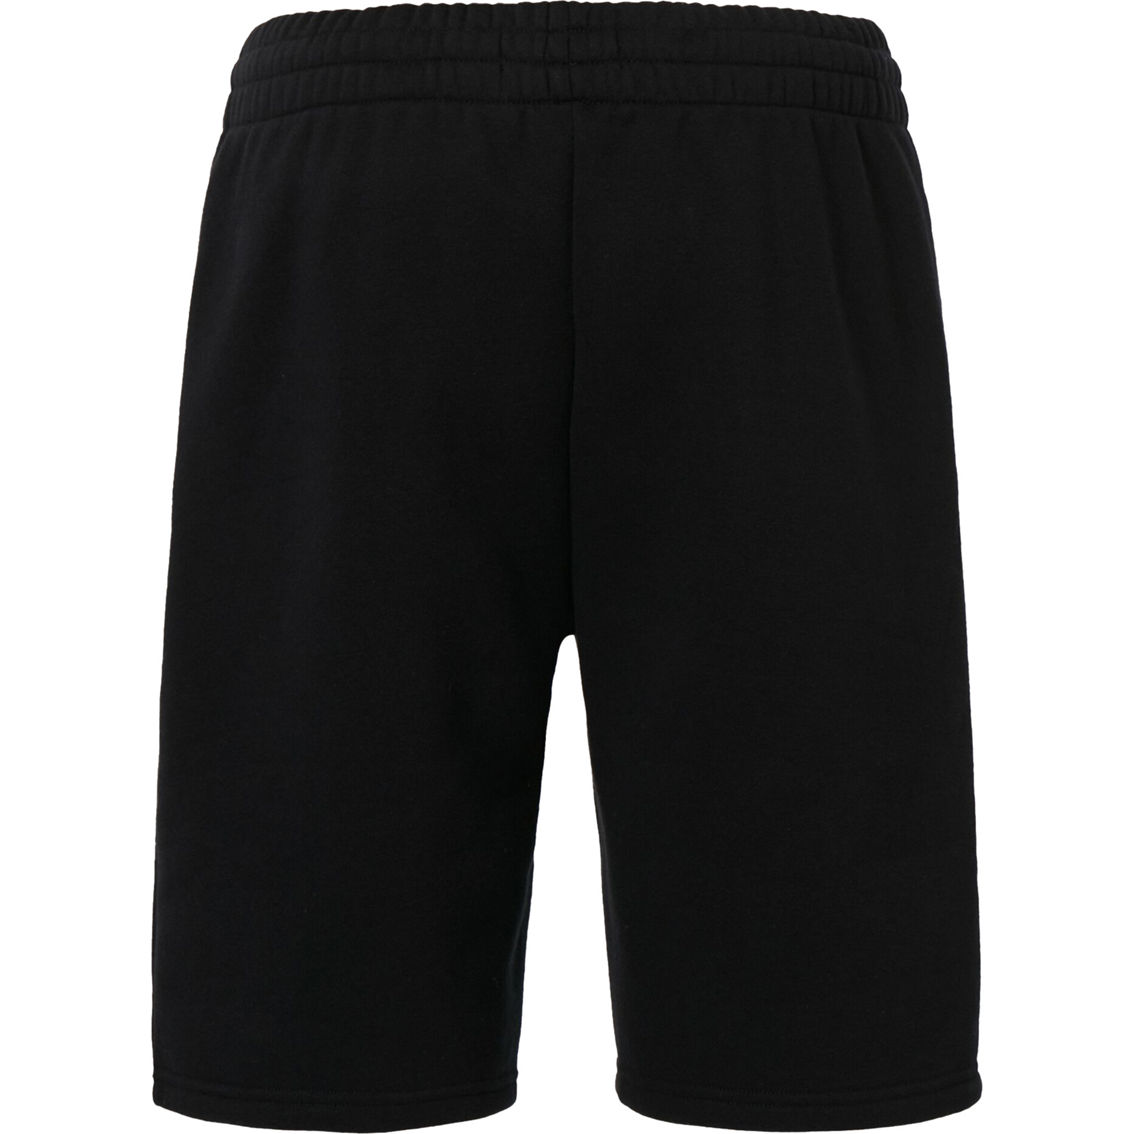 Oakley Relax Shorts 2.0 - Image 2 of 4